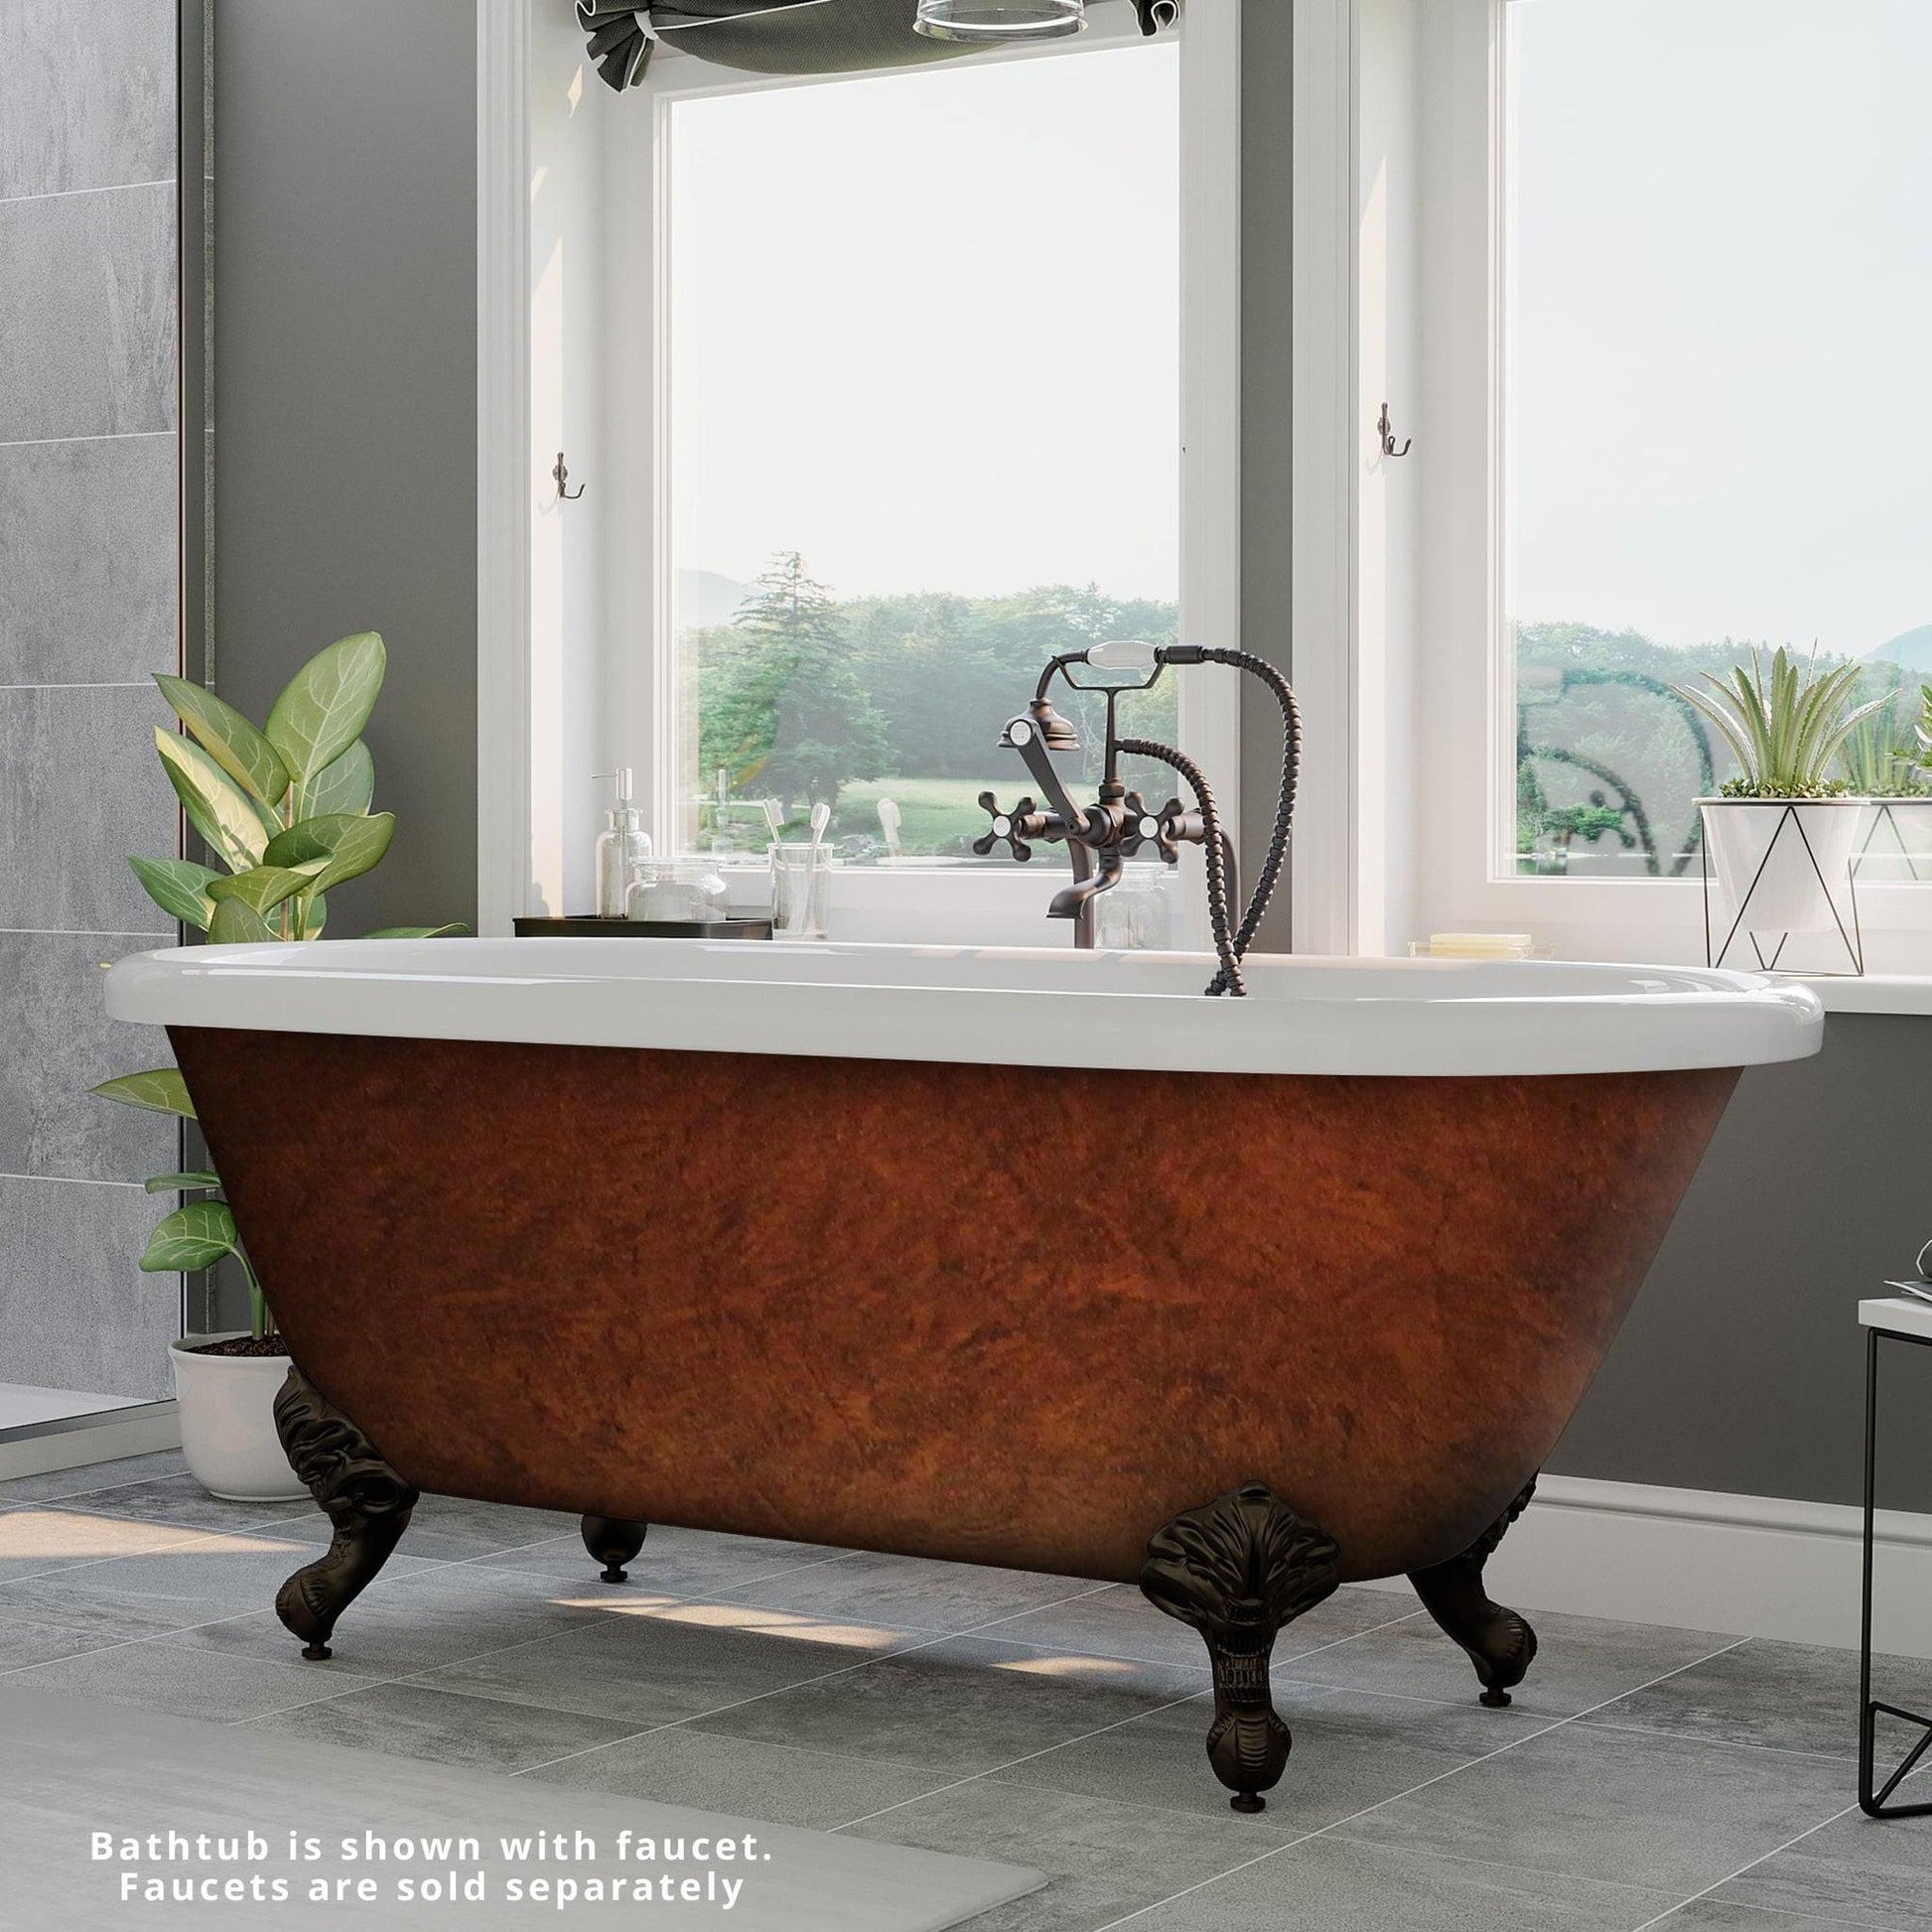 Cambridge Plumbing 70" Hand Painted Copper Bronze Acrylic Double Ended Clawfoot Bathtub With No Faucet Holes With Oil Rubbed Bronze Feet